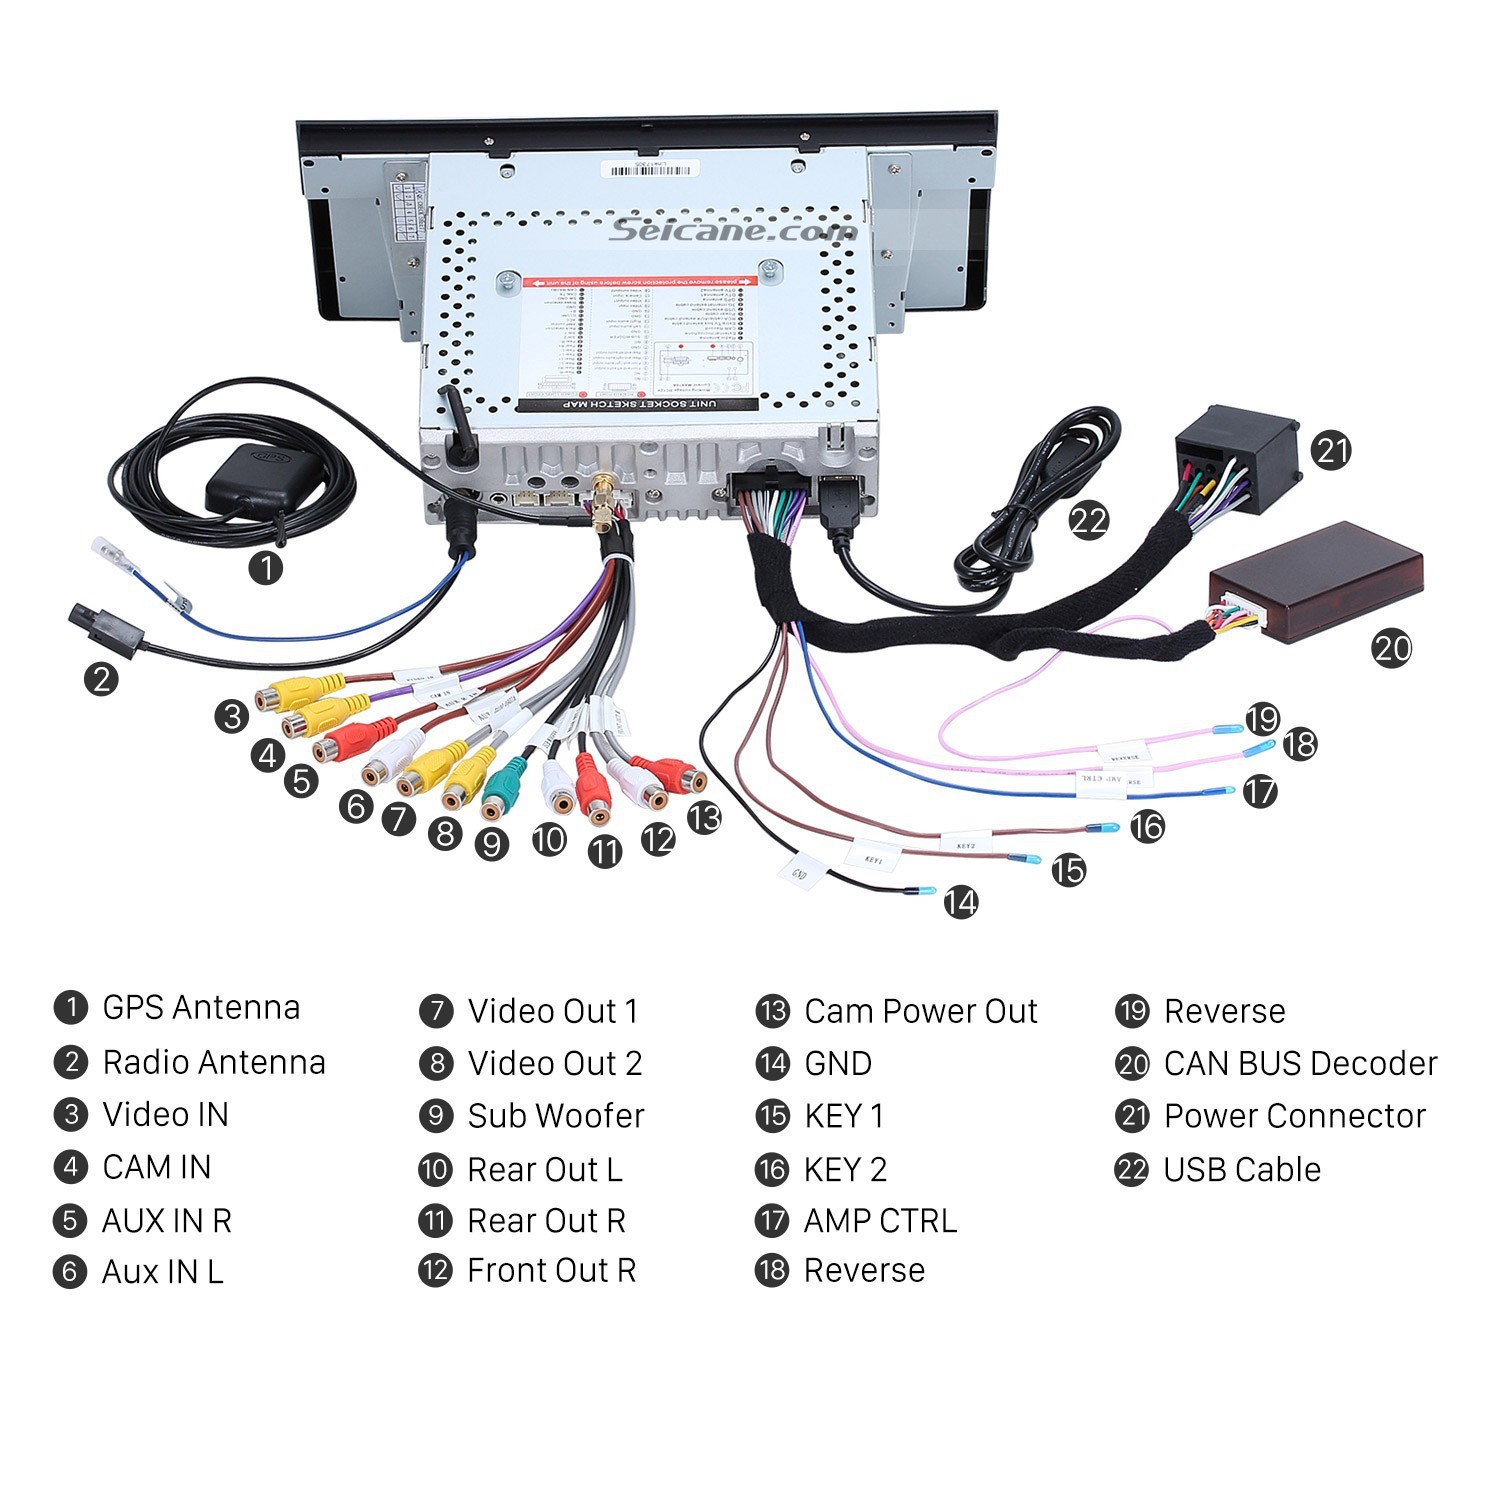 Diagram Of Car Part Steering Wheel Radio Controls Wiring Diagram New Cheap All In E Of Diagram Of Car Part